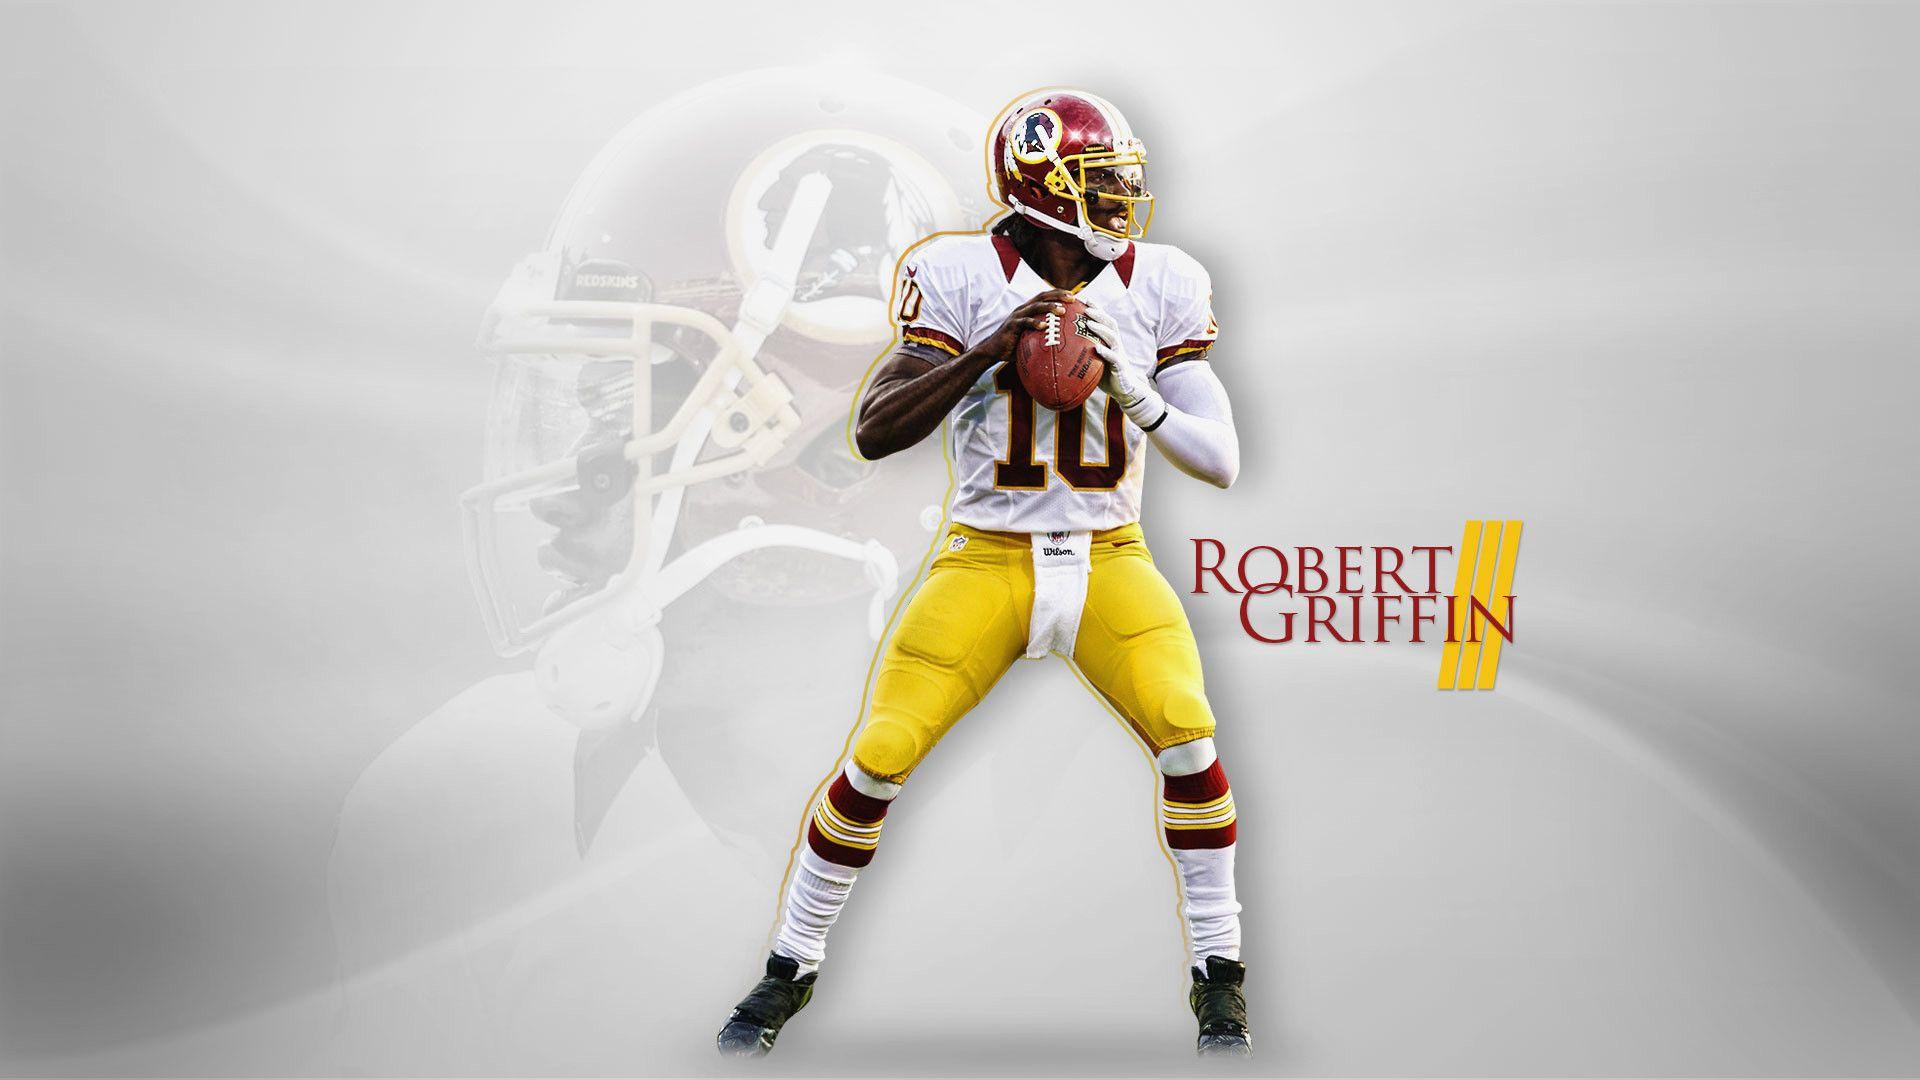 Rg3 Wallpaper Download Image and Picture